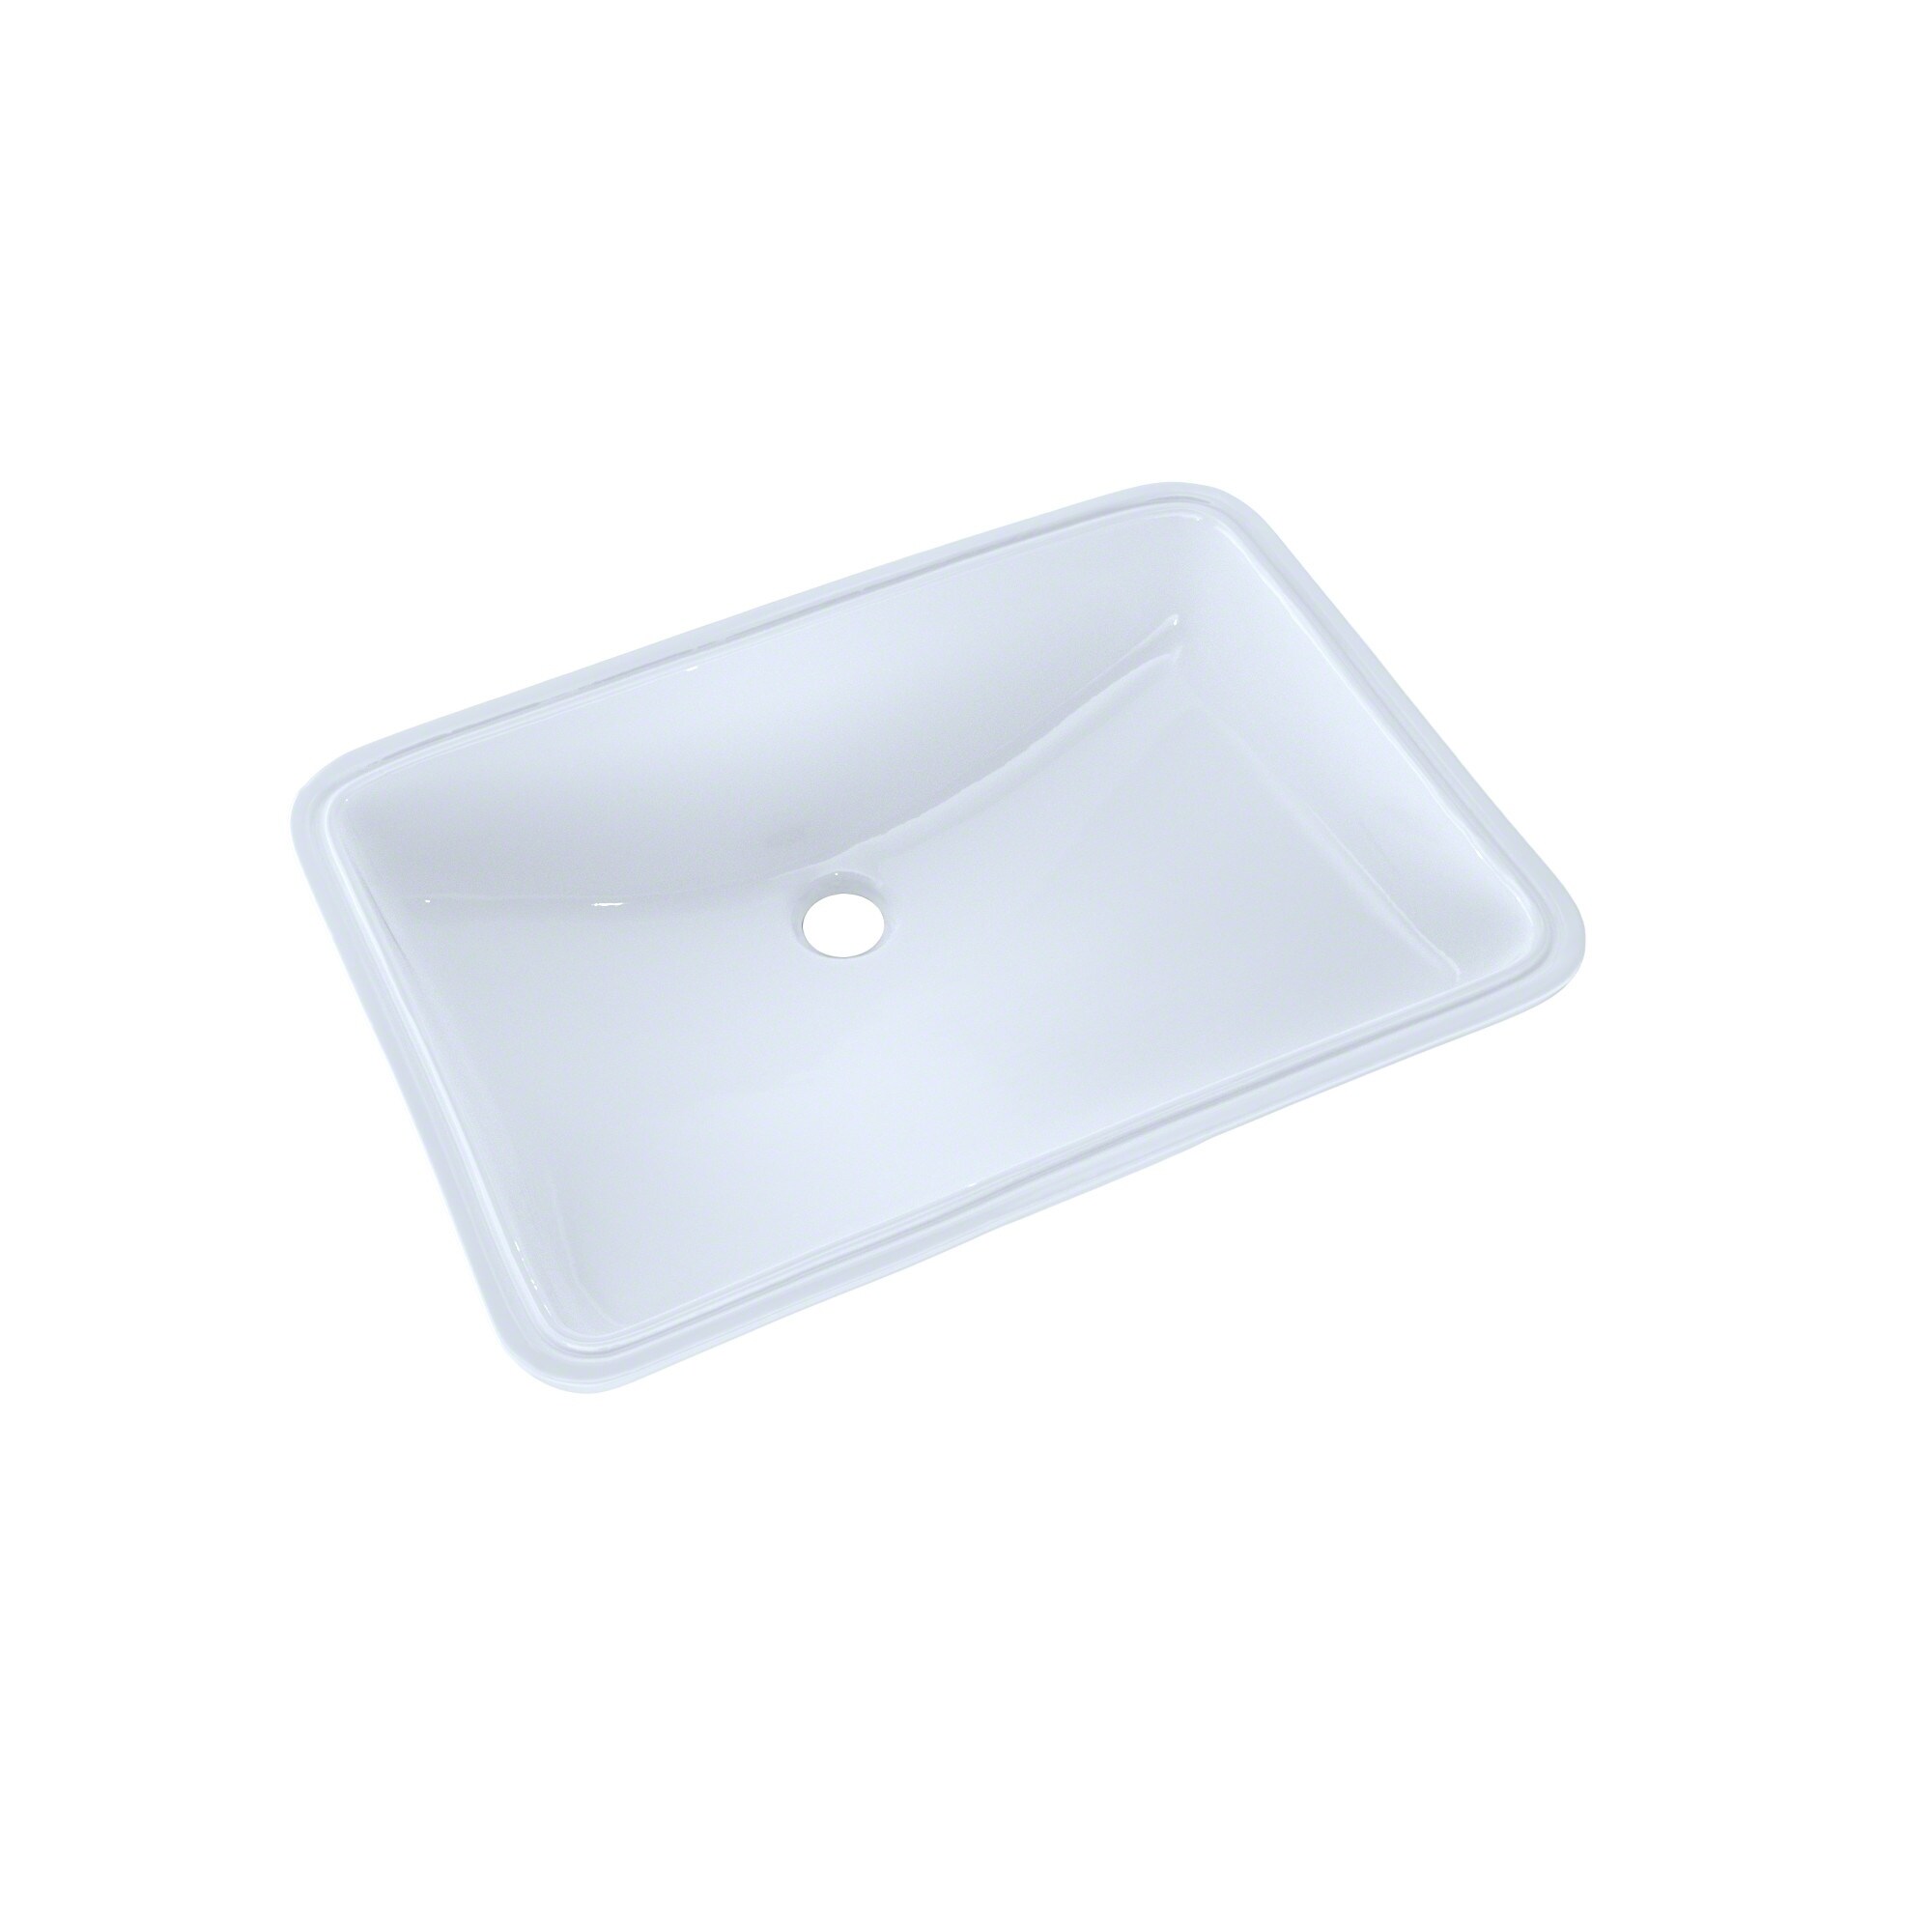 Toto 21 1 4 X 14 3 8 Large Rectangular Undermount Bathroom Sink With Cefiontect